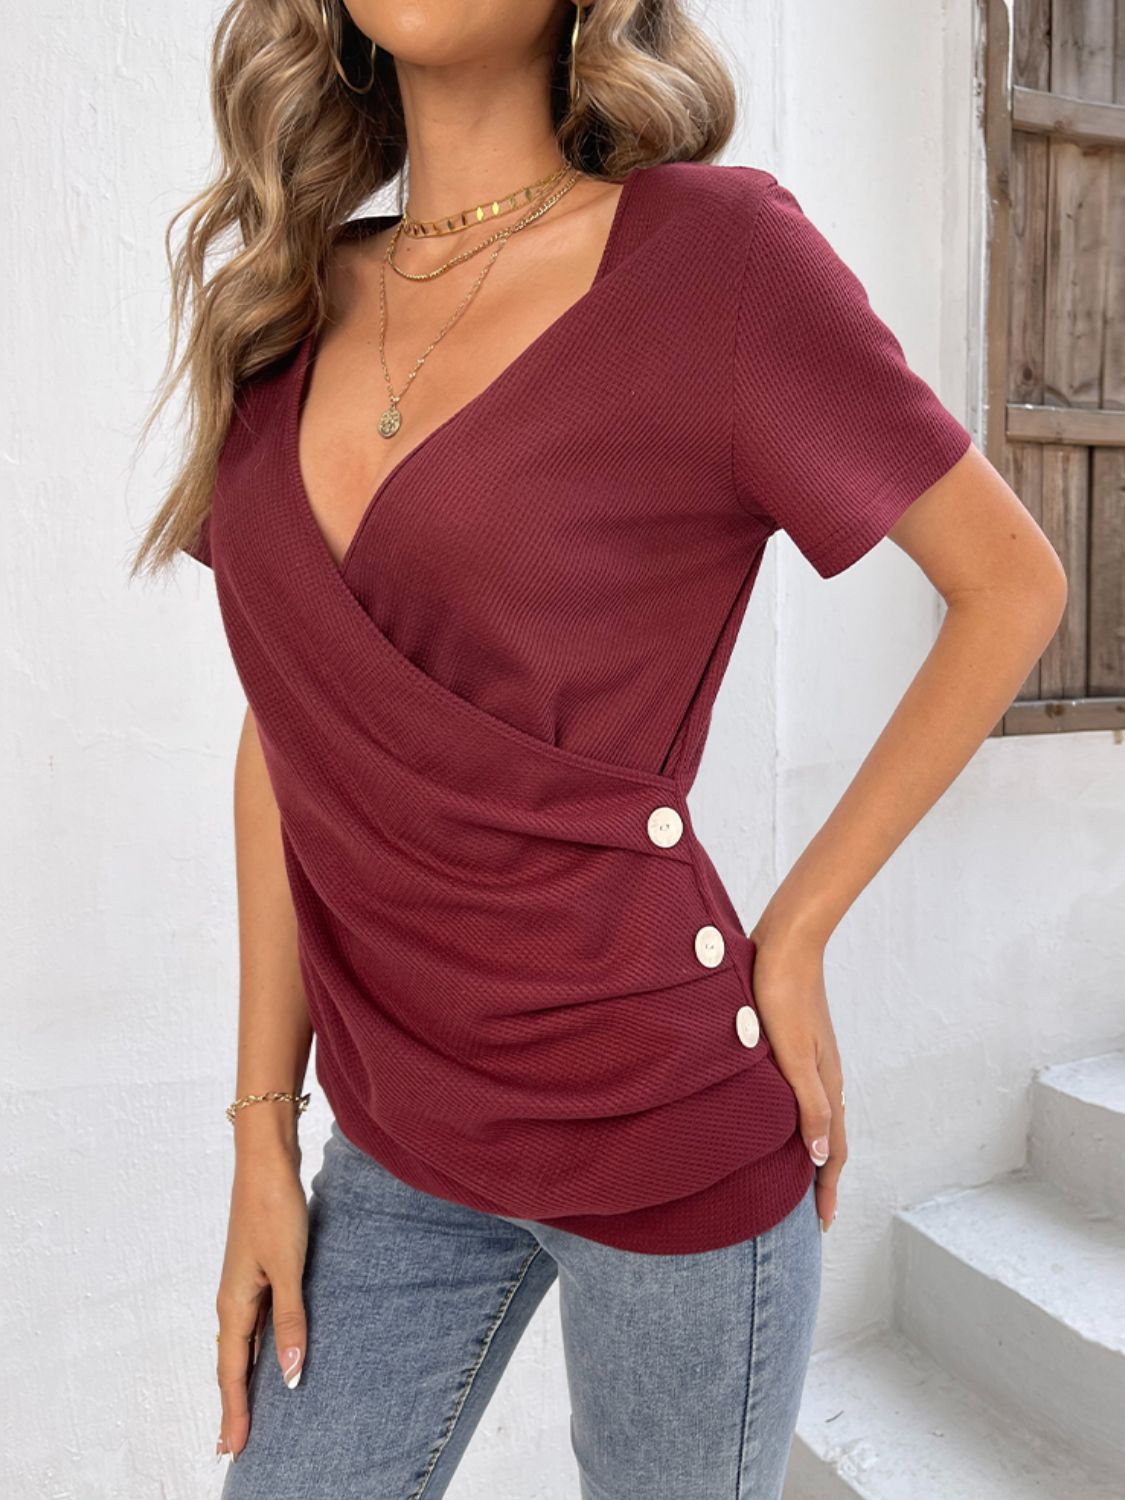 Button Detail Surplice Short Sleeve Tee - Embrace Your Romantic Side with this Chic and Sophisticated Piece - Accentuates Your Figure in all the Right Places. - Guy Christopher